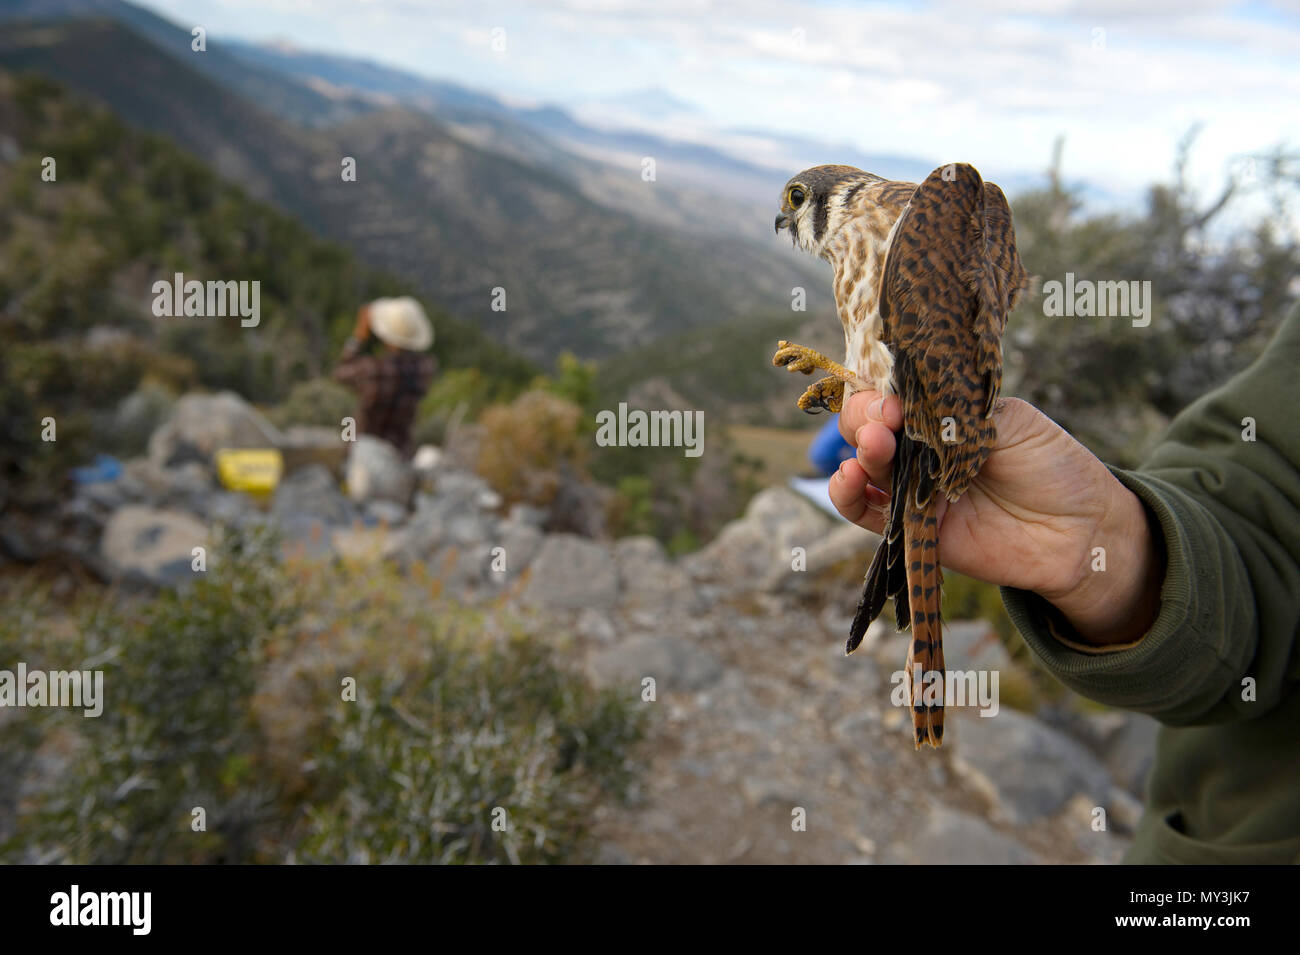 A male Kestrel waits to be released after being banded at Hawkwatch International's Goshute mountain research station with observers in the background Stock Photo